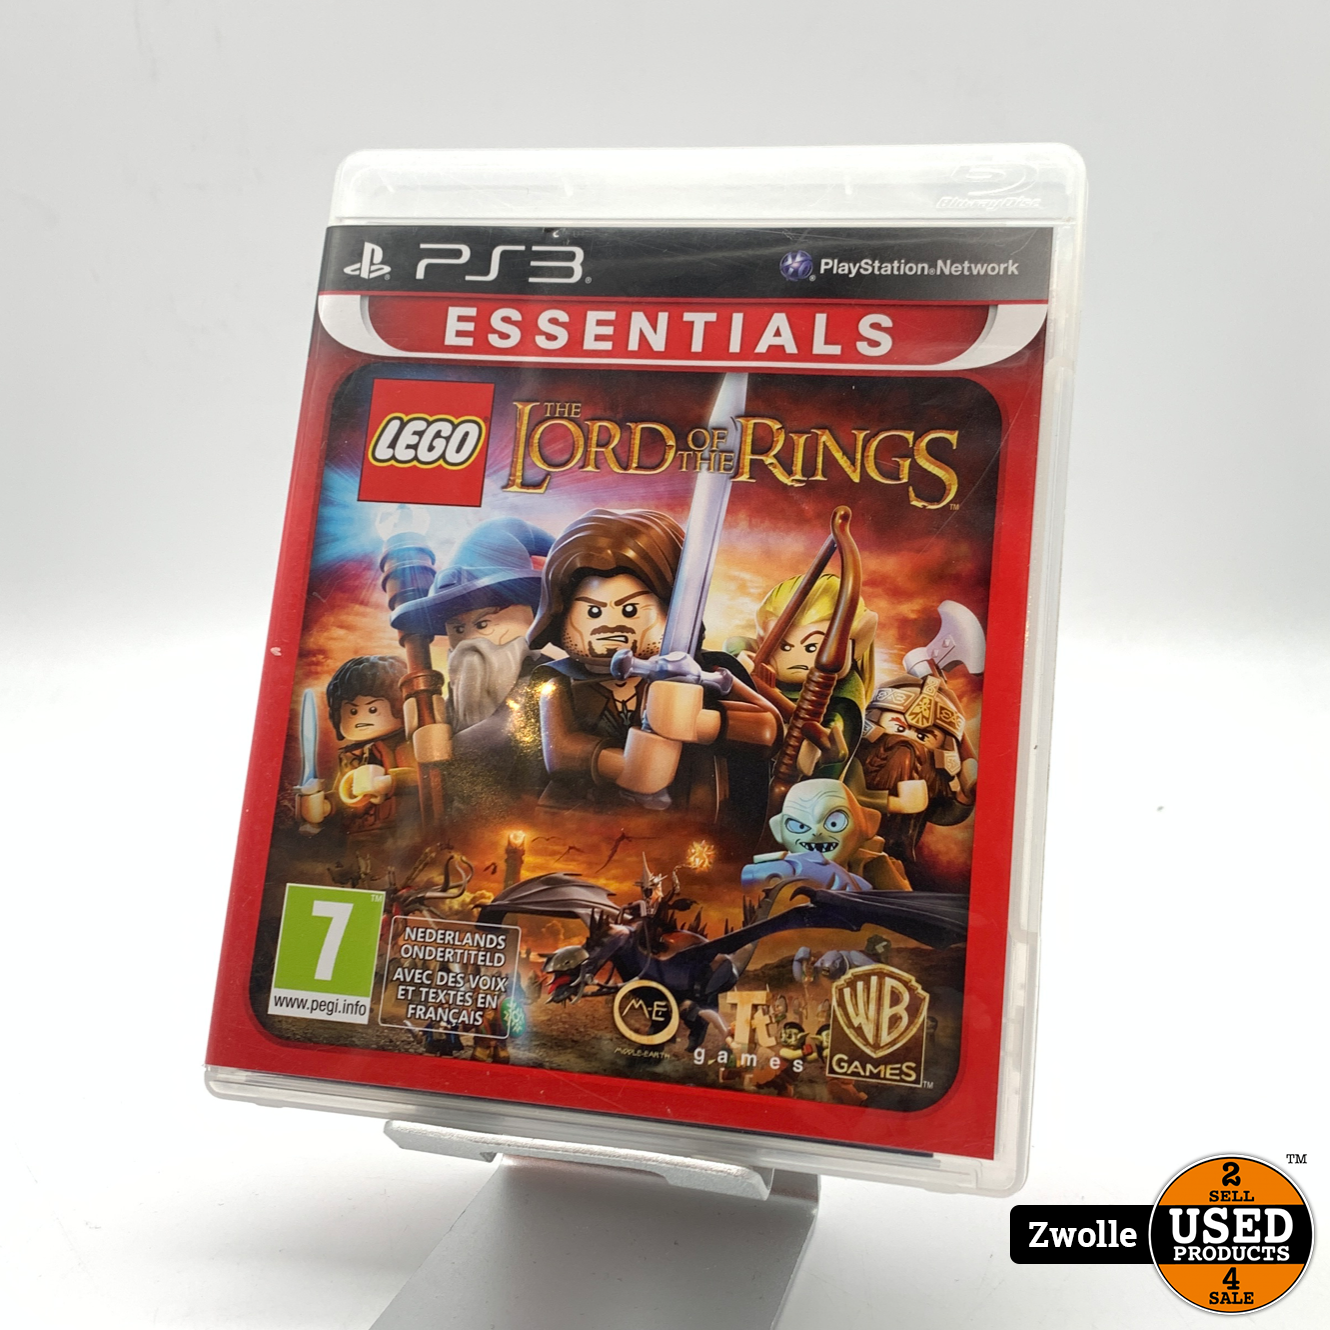 afbetalen hardware kruis Playstation 3 game | The lord of the rings - Used Products Zwolle